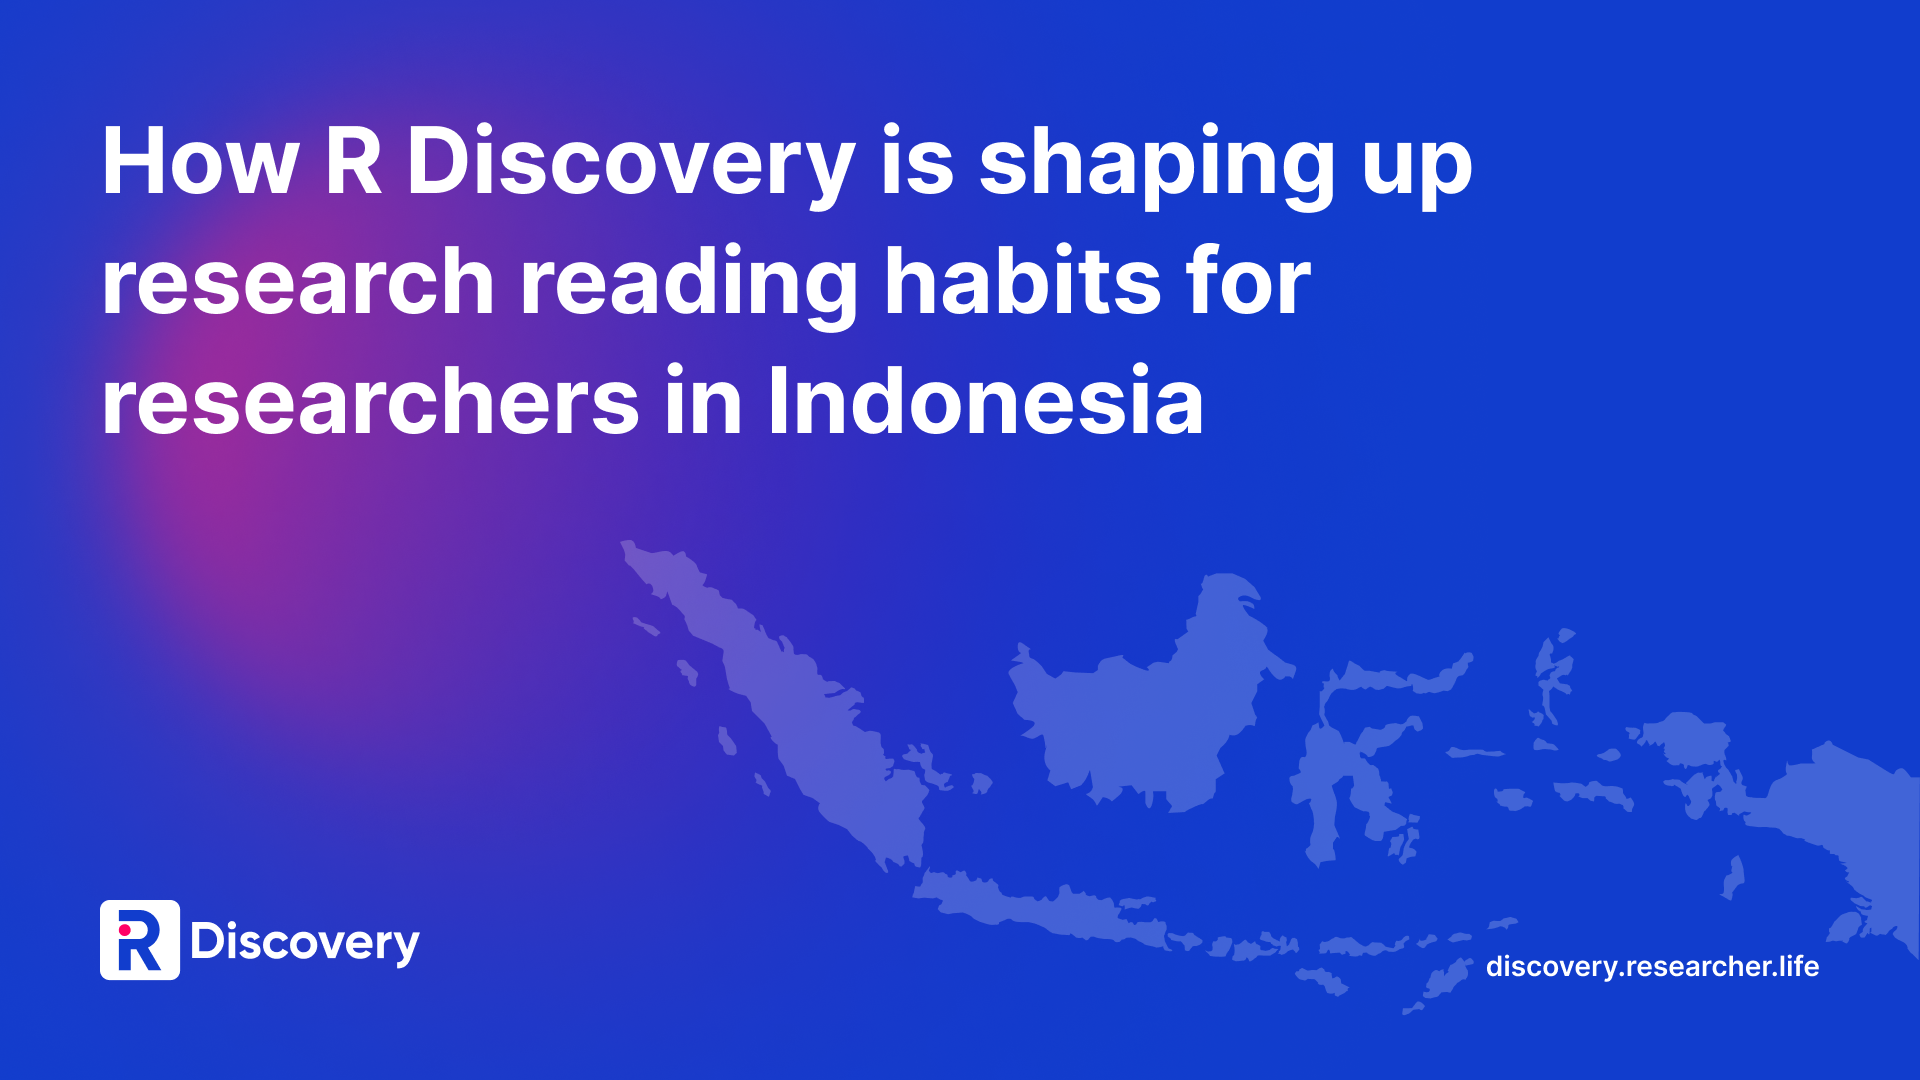 How R Discovery is Shaping Research Reading Habits for Researchers in Indonesia